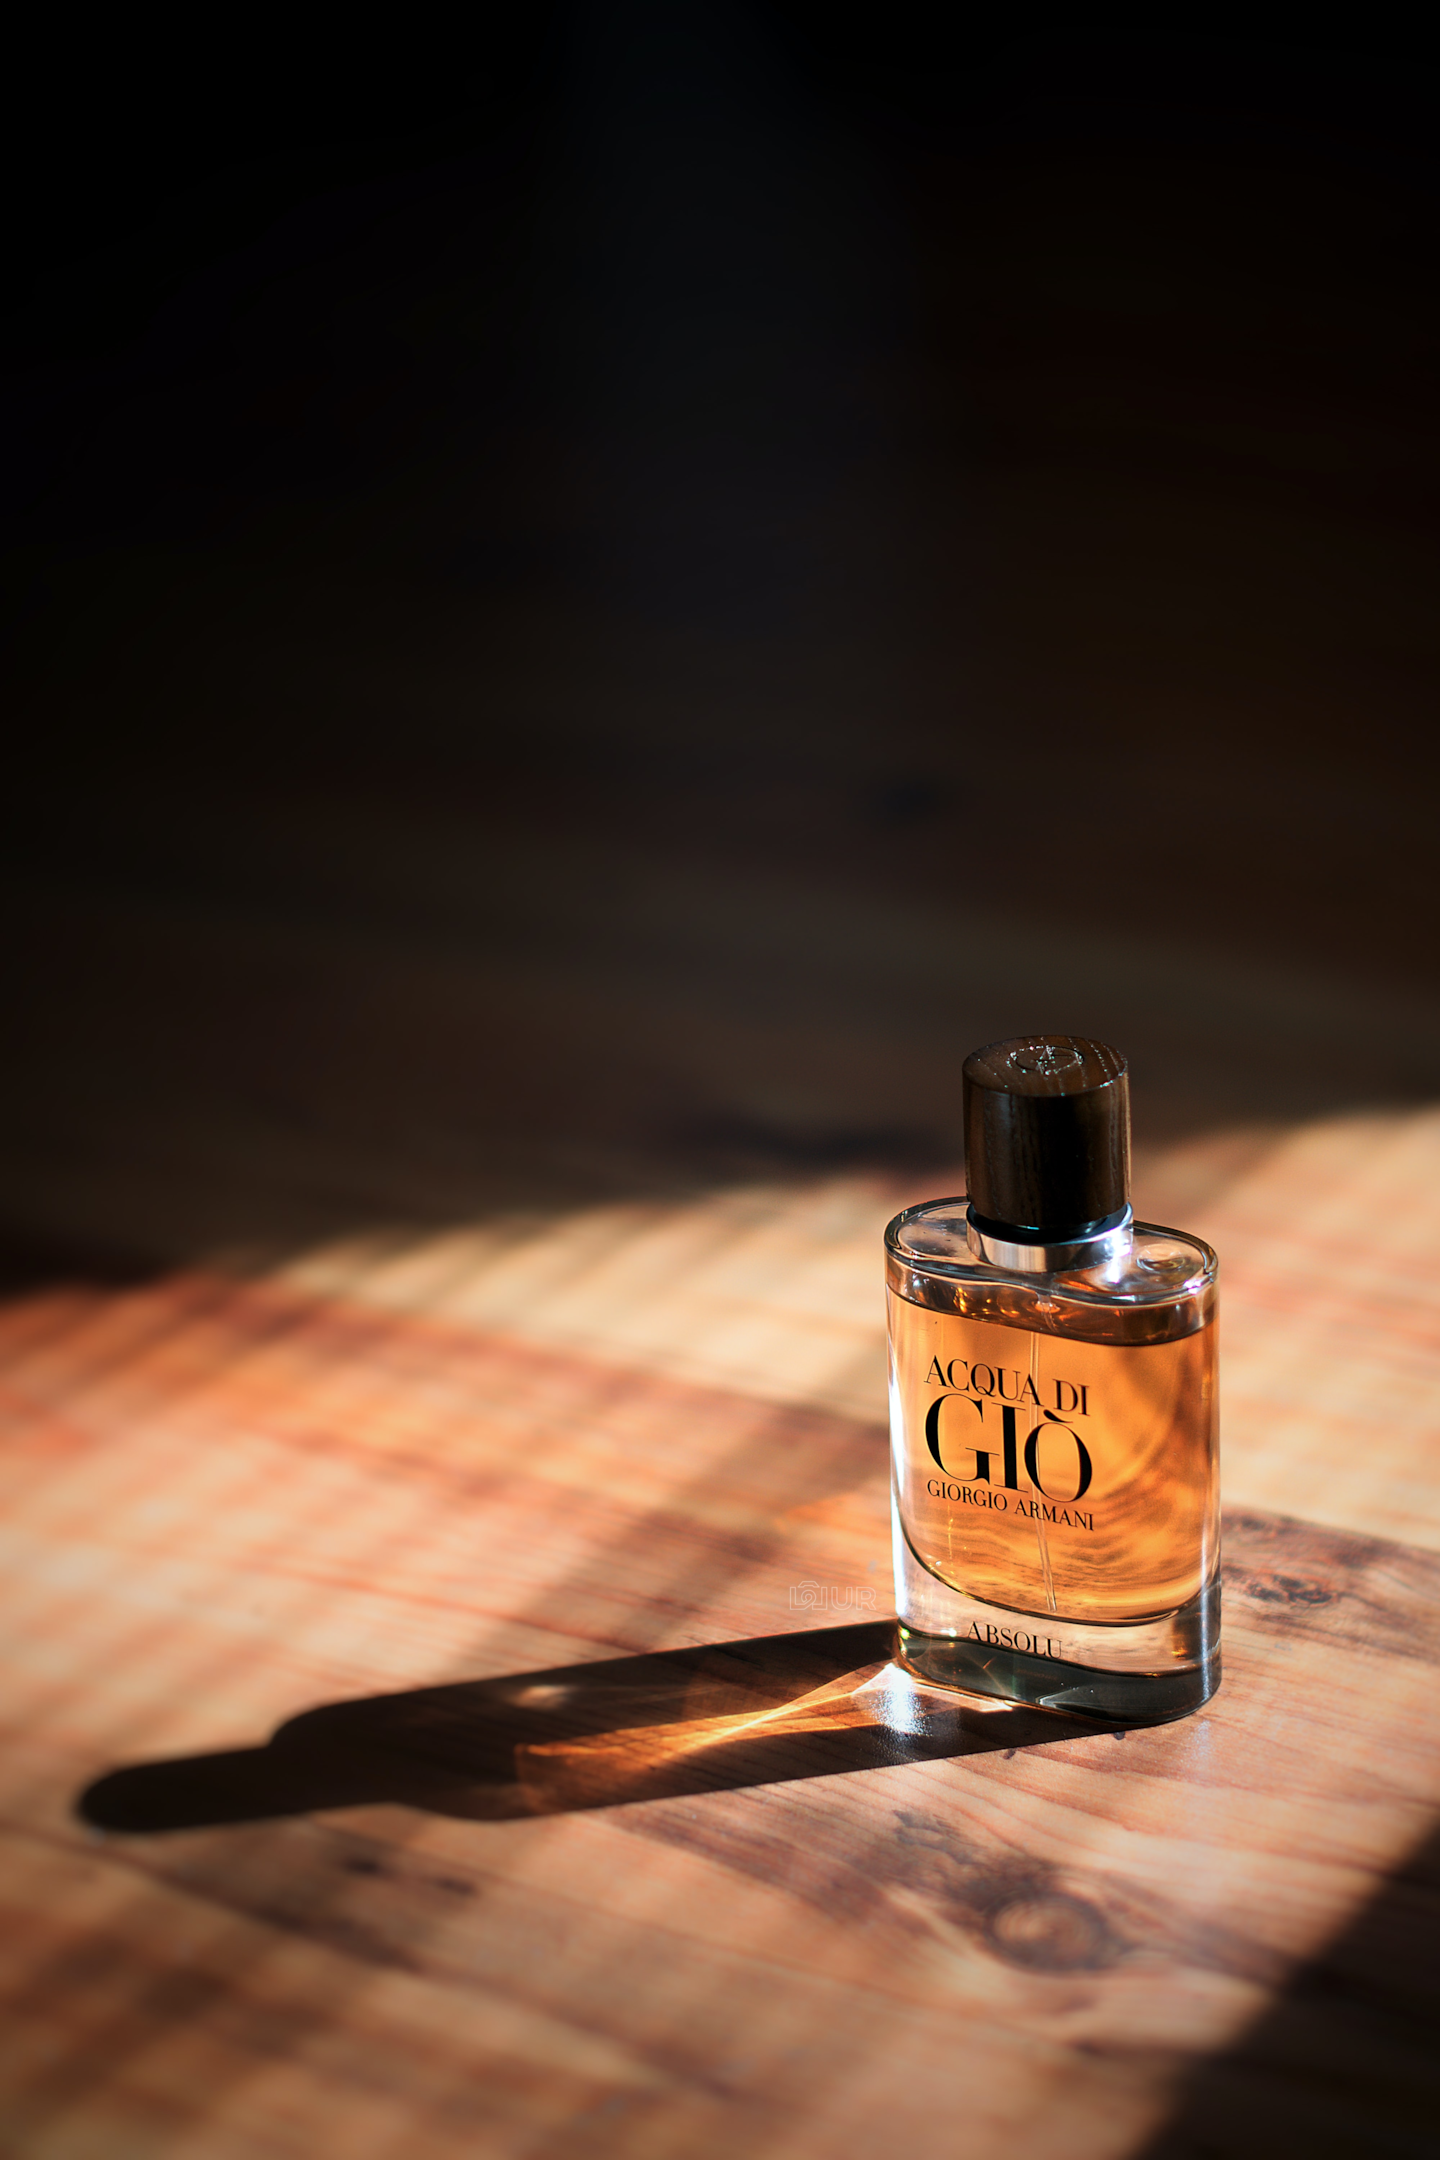 Giorgio Armani is a popular brand for men's formal wears and fragrances | Photo by Dorrell Tibbs from Unsplash